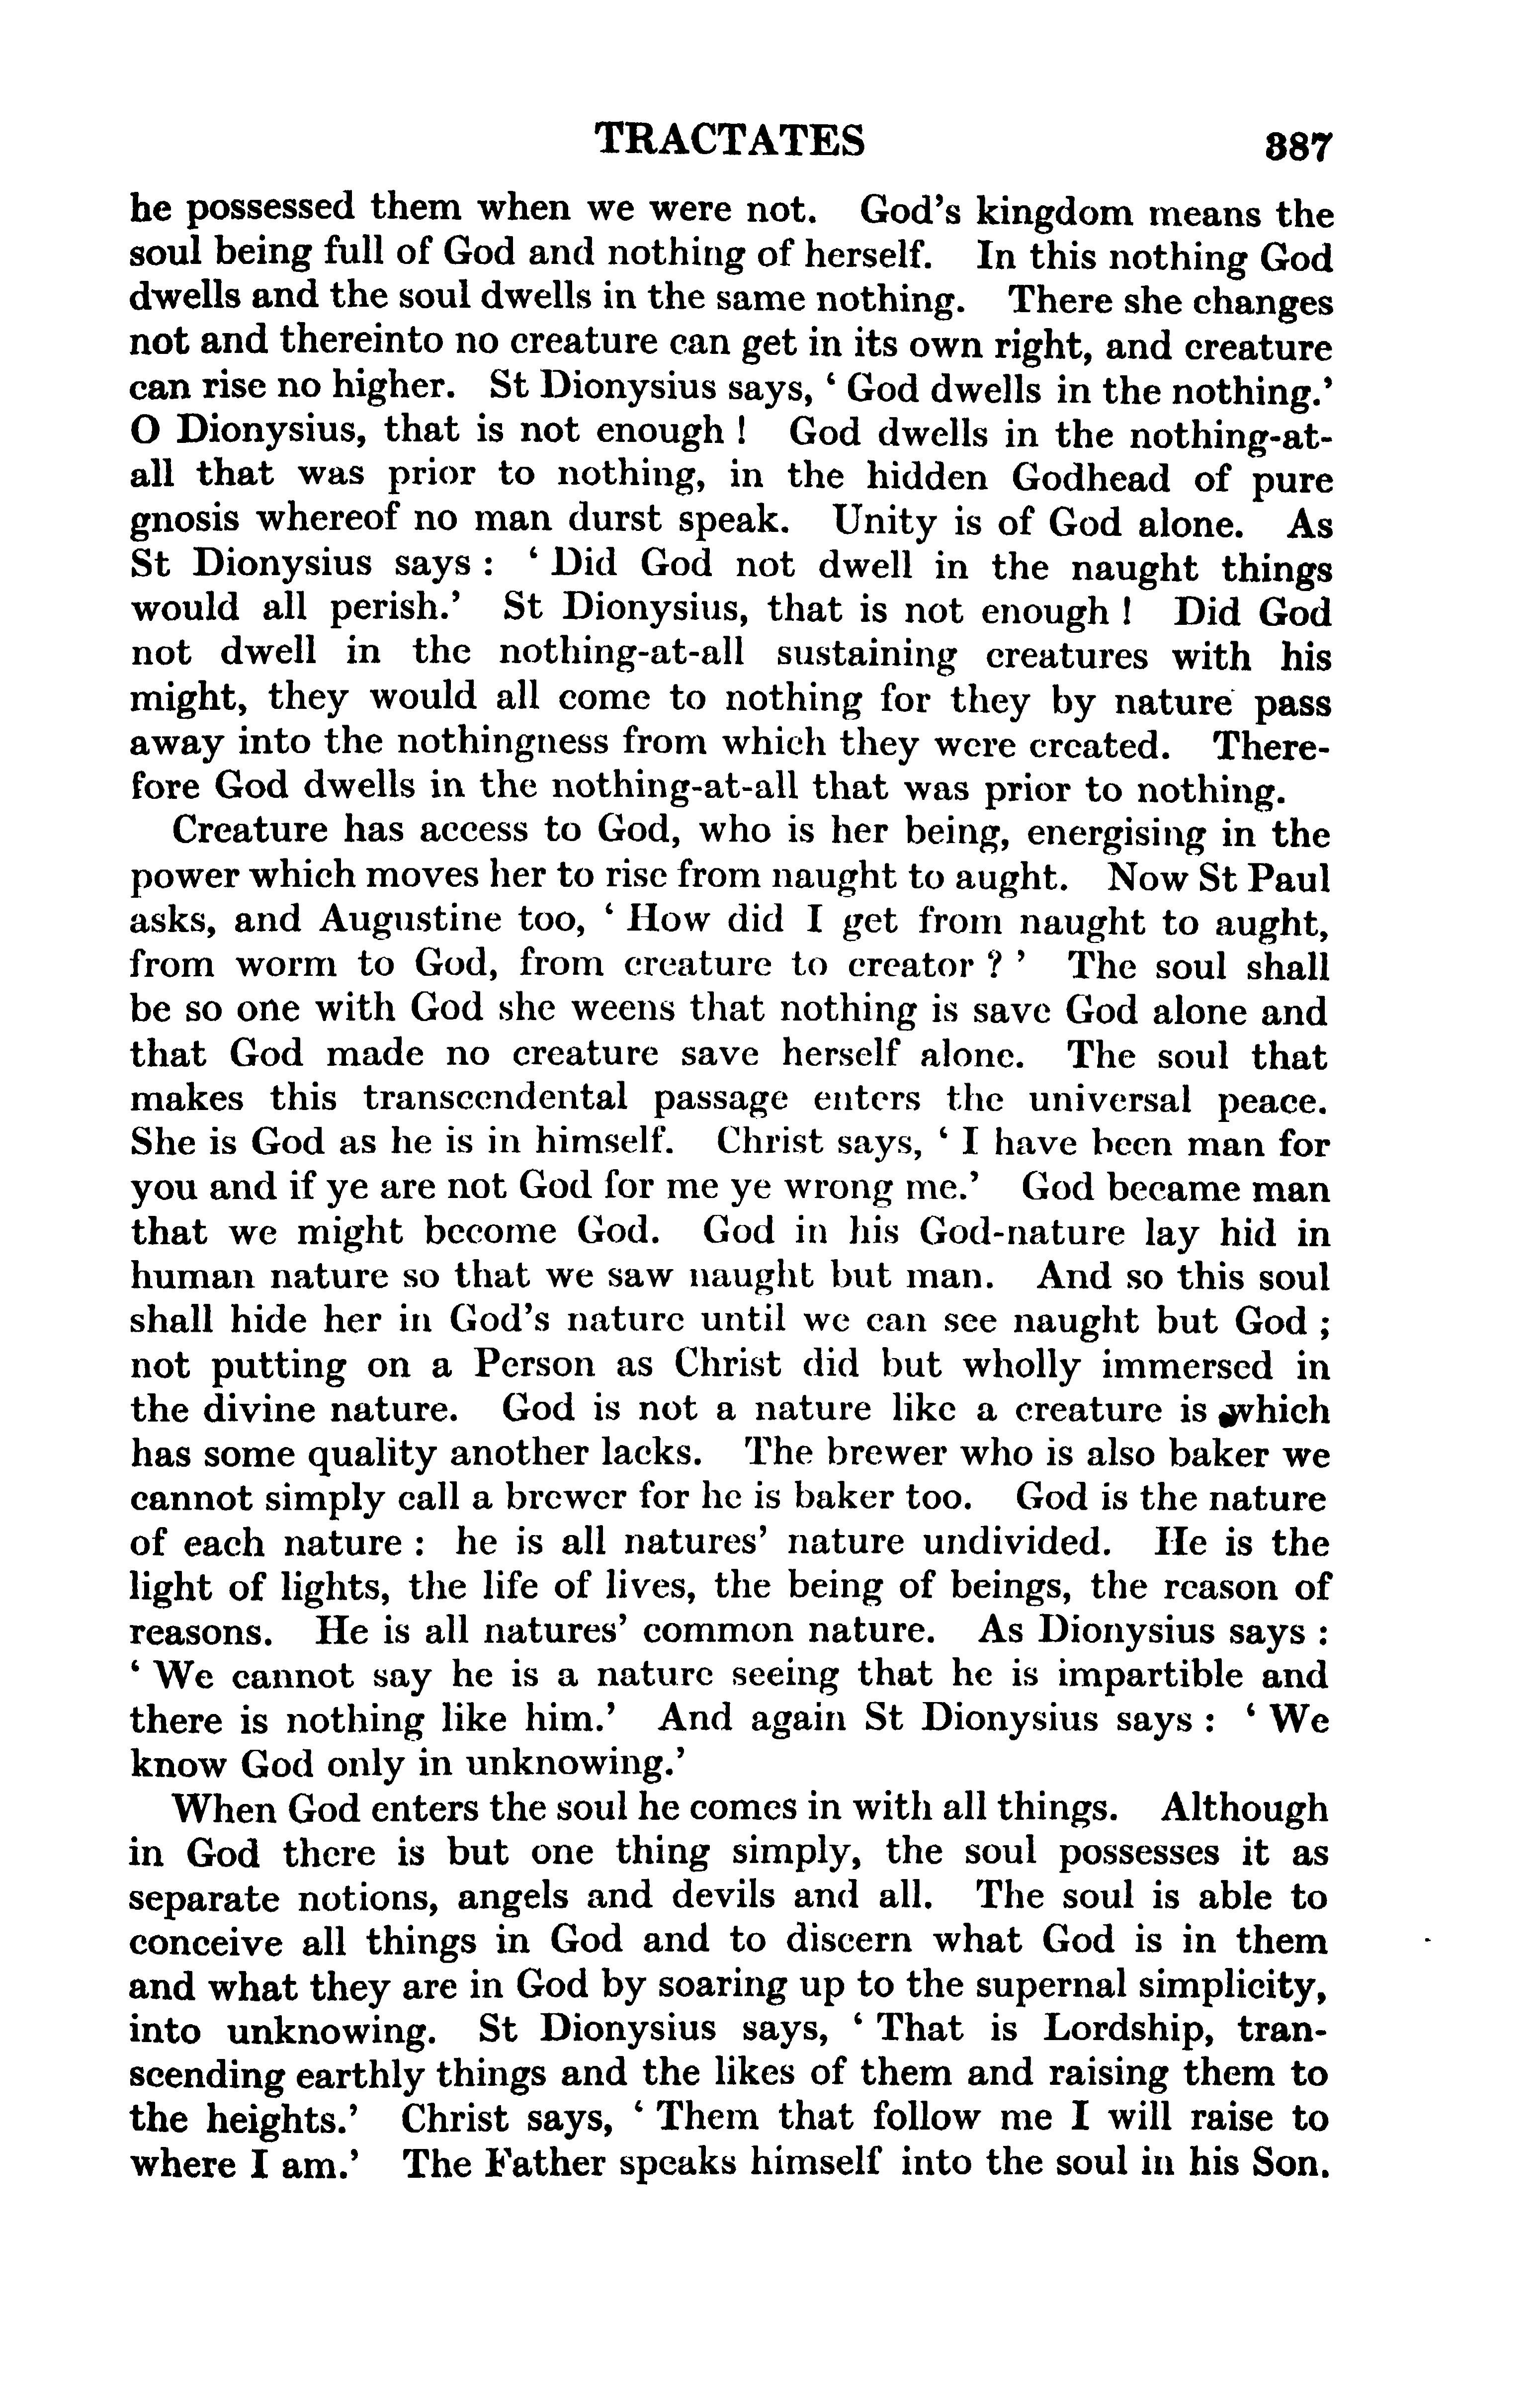 Image of page 0411